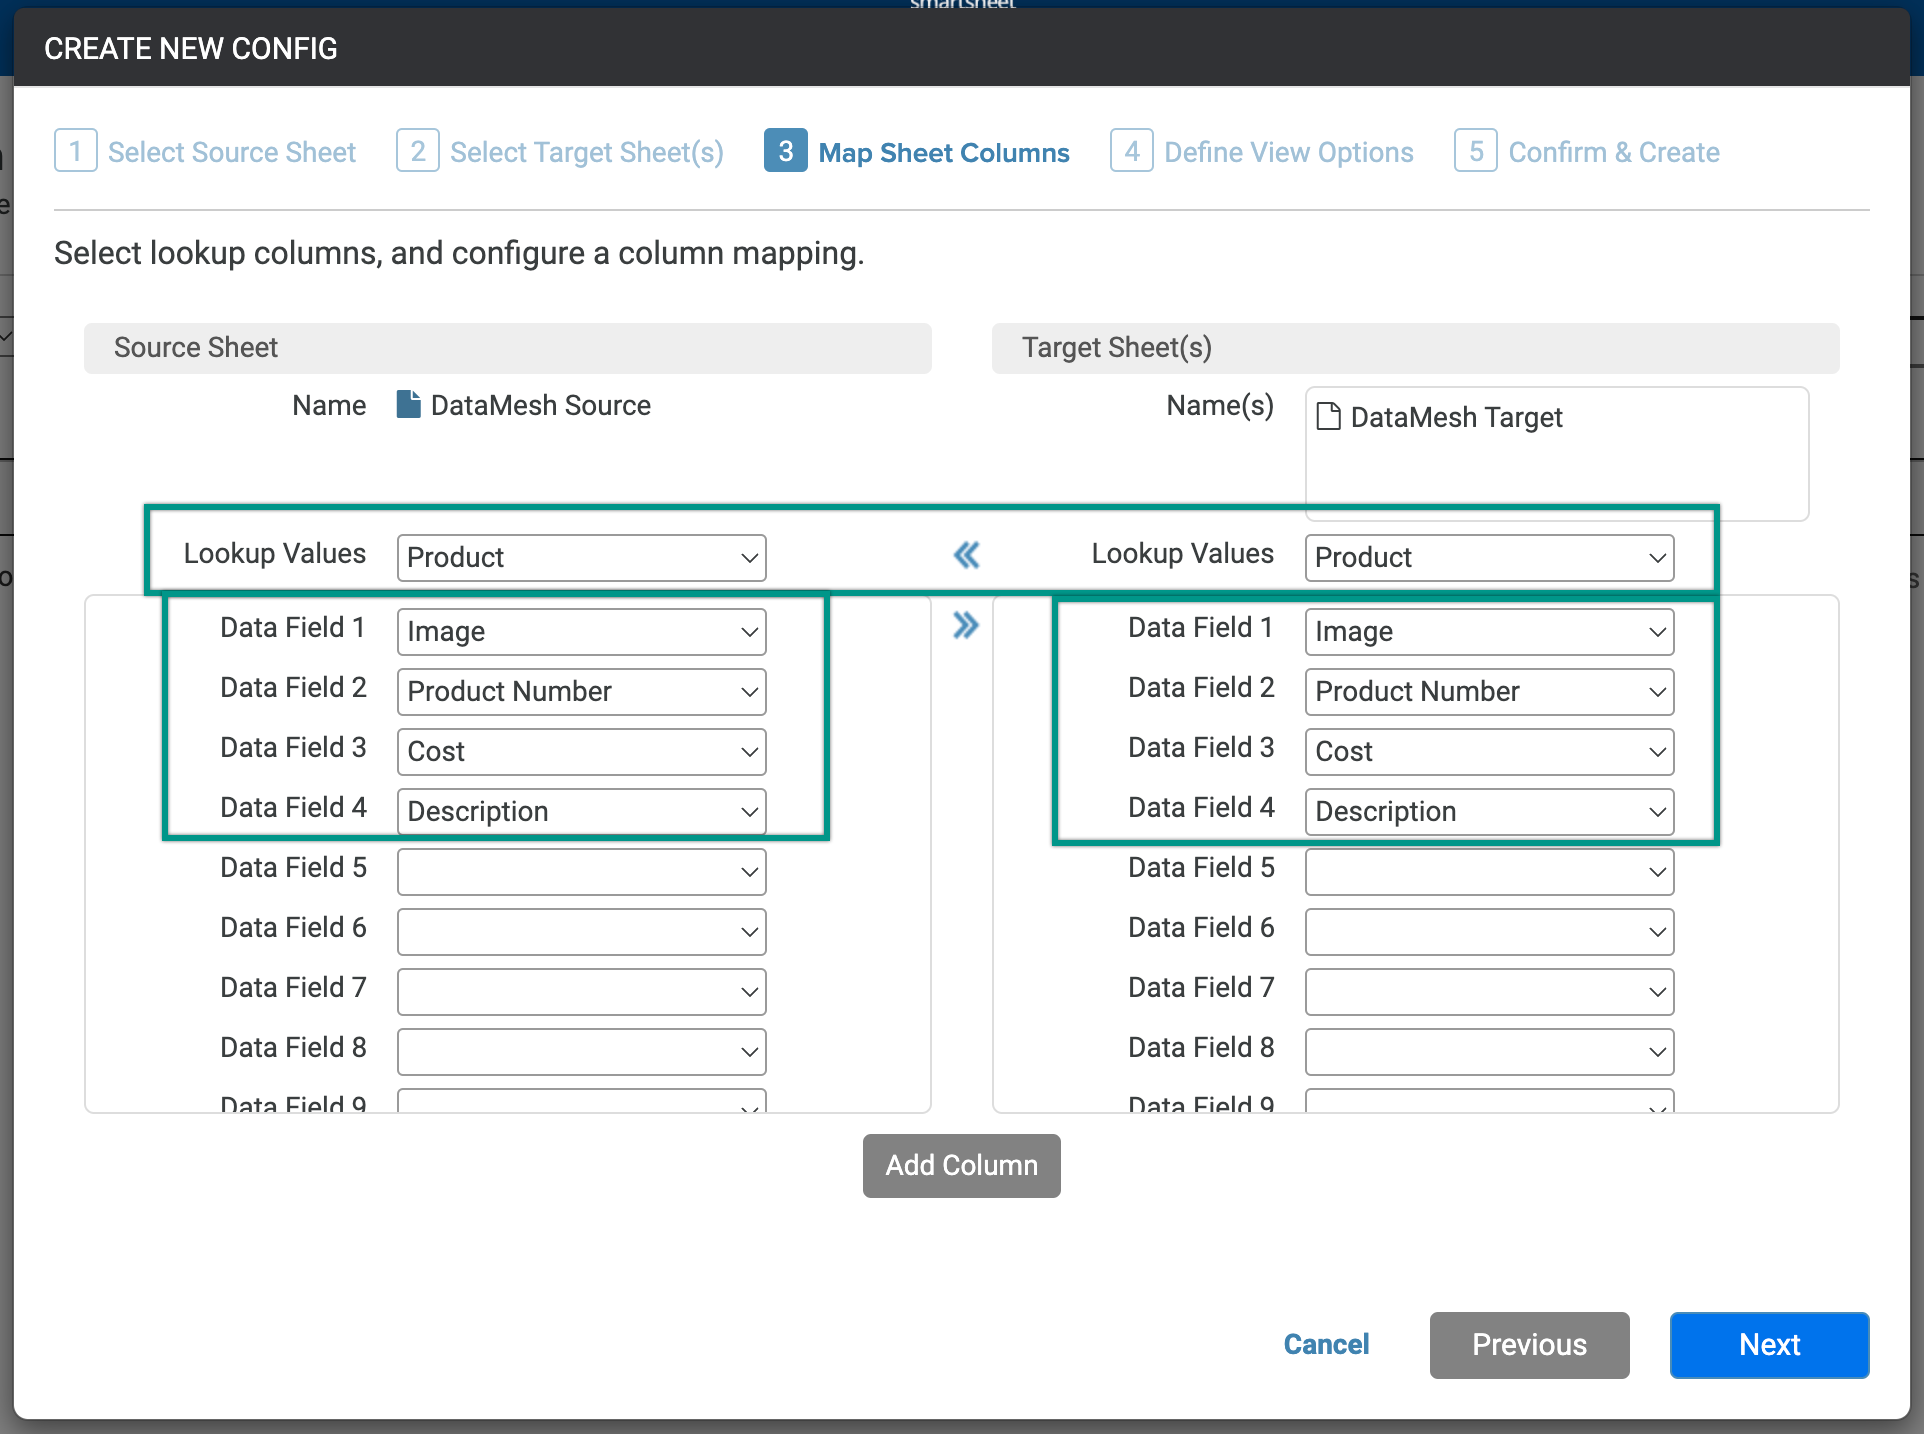 Create new config screen with look values and data fields selected for source and target sheets.